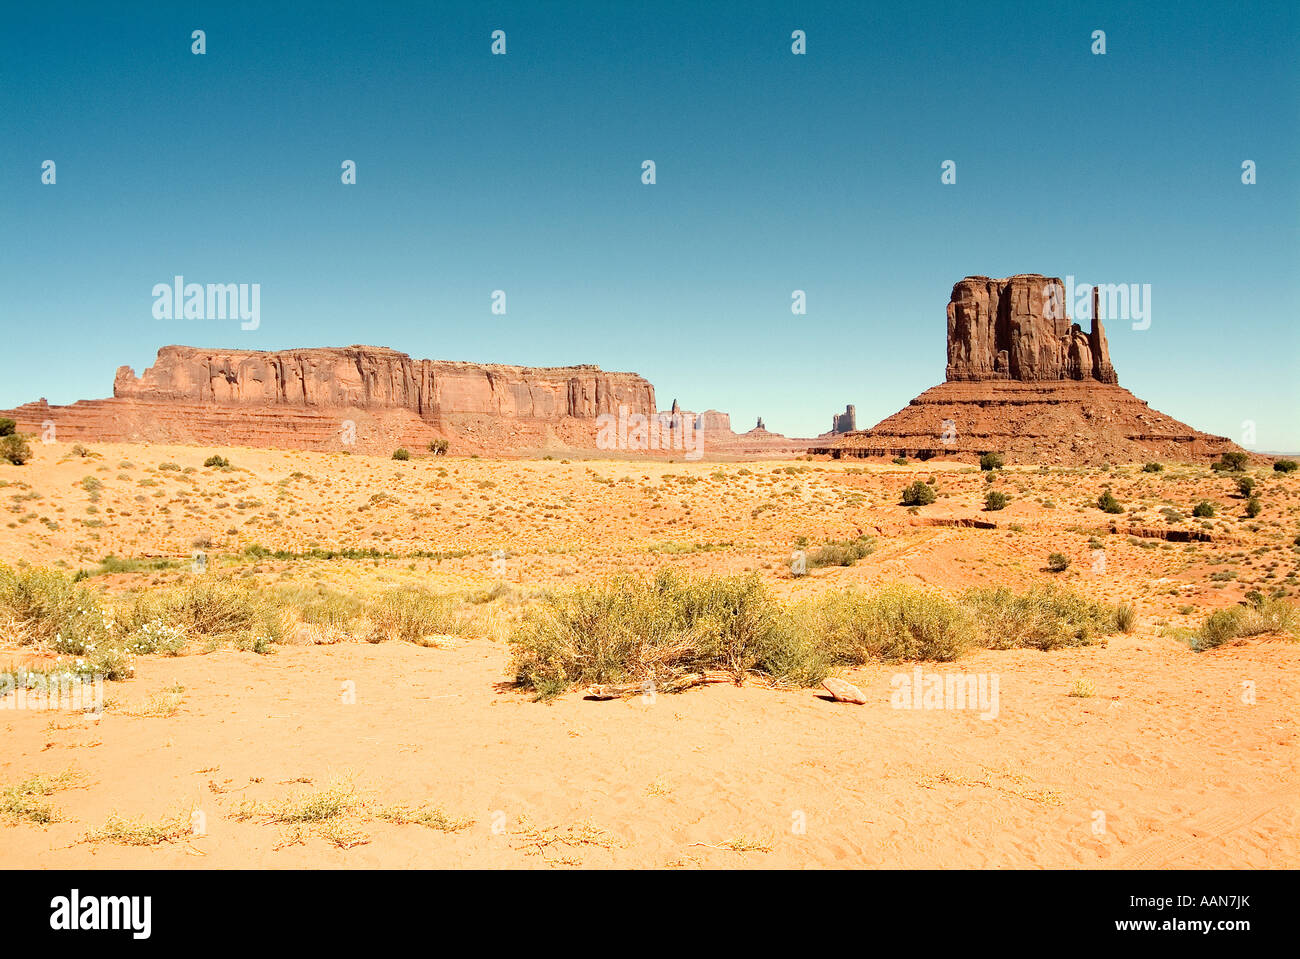 The Castle and a Mitten Butte. Monument Valley. Navajo Nation tribal park. Arizona and Utah States. USA Stock Photo